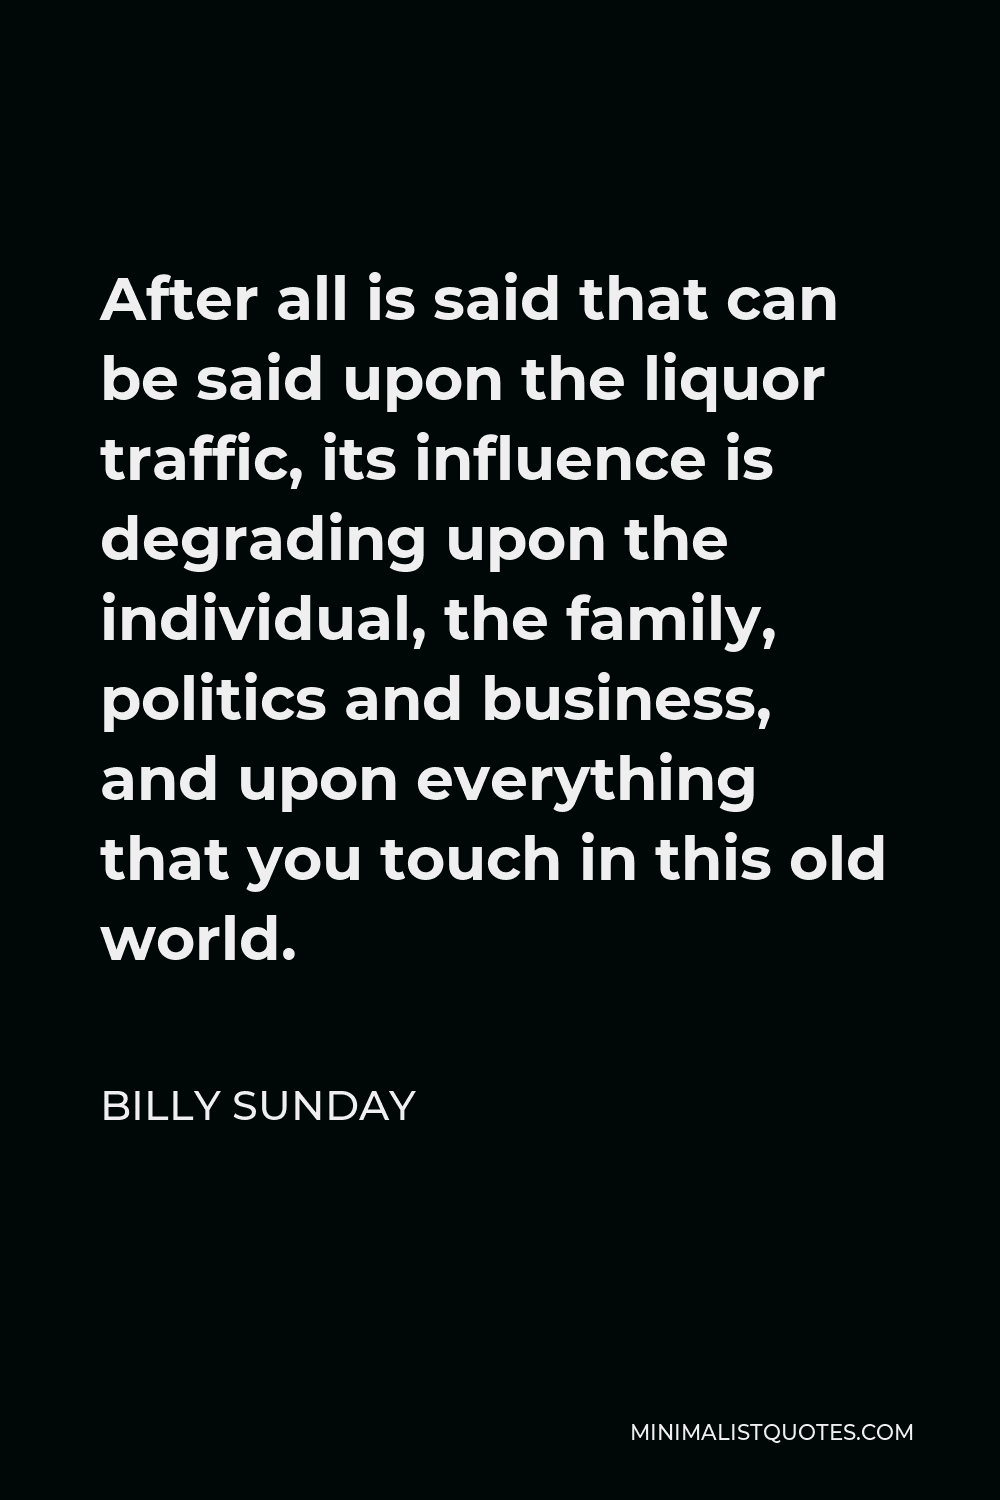 Billy Sunday Quote - After all is said that can be said upon the liquor traffic, its influence is degrading upon the individual, the family, politics and business, and upon everything that you touch in this old world.